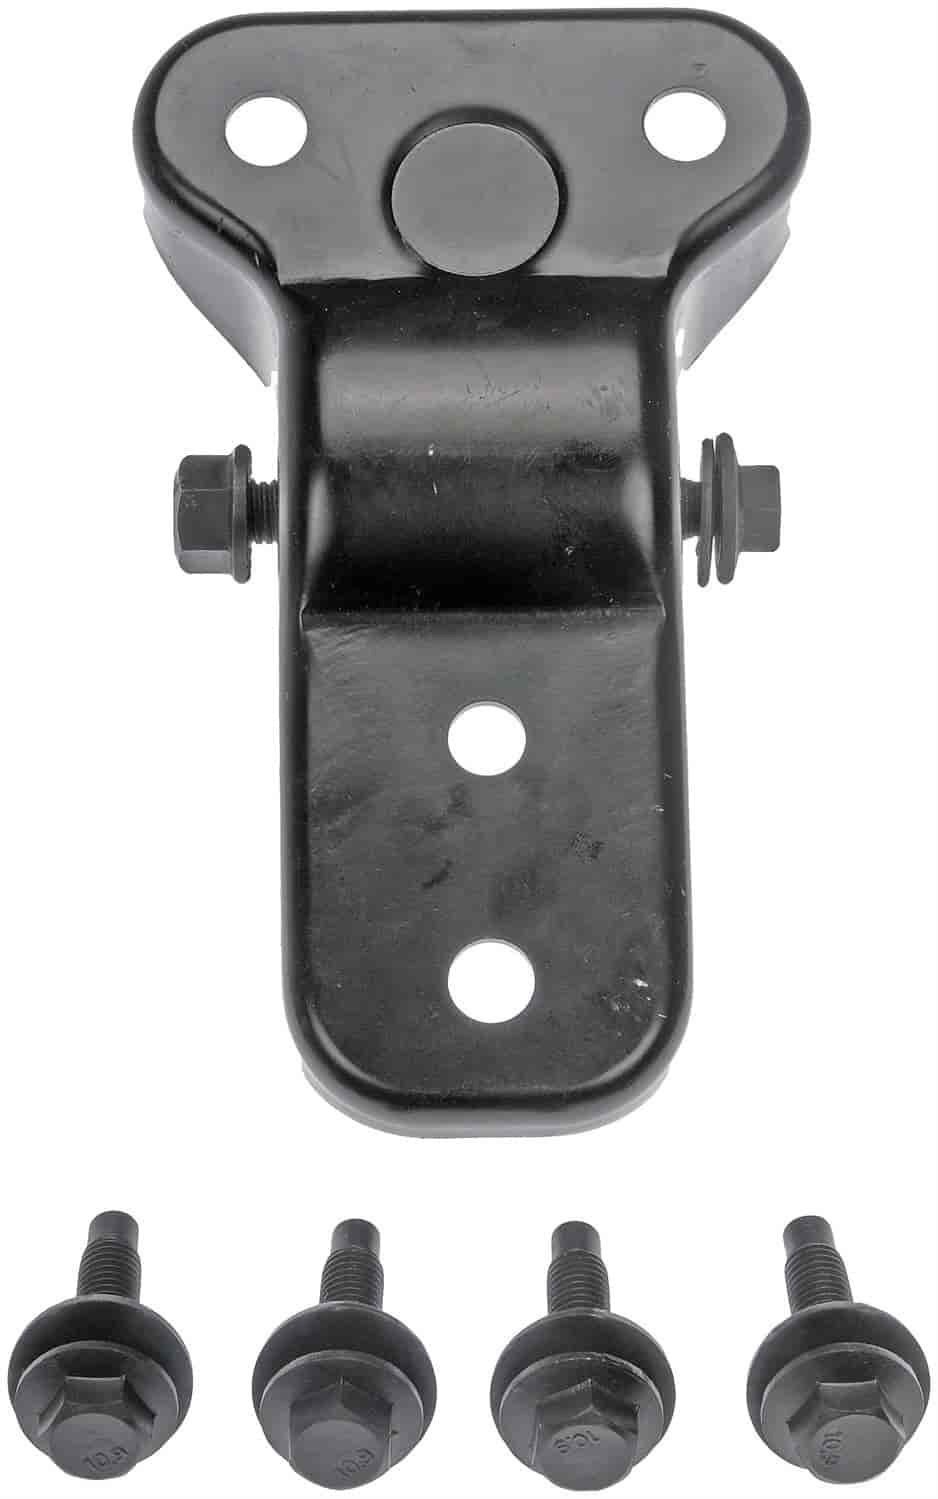 Trailing Arm Bracket 1997-2008 Pontiac, 1997-2009 Buick, 1998-2002 Oldsmobile, 2000-2016 Chevy - Rear Left OR Rear Right